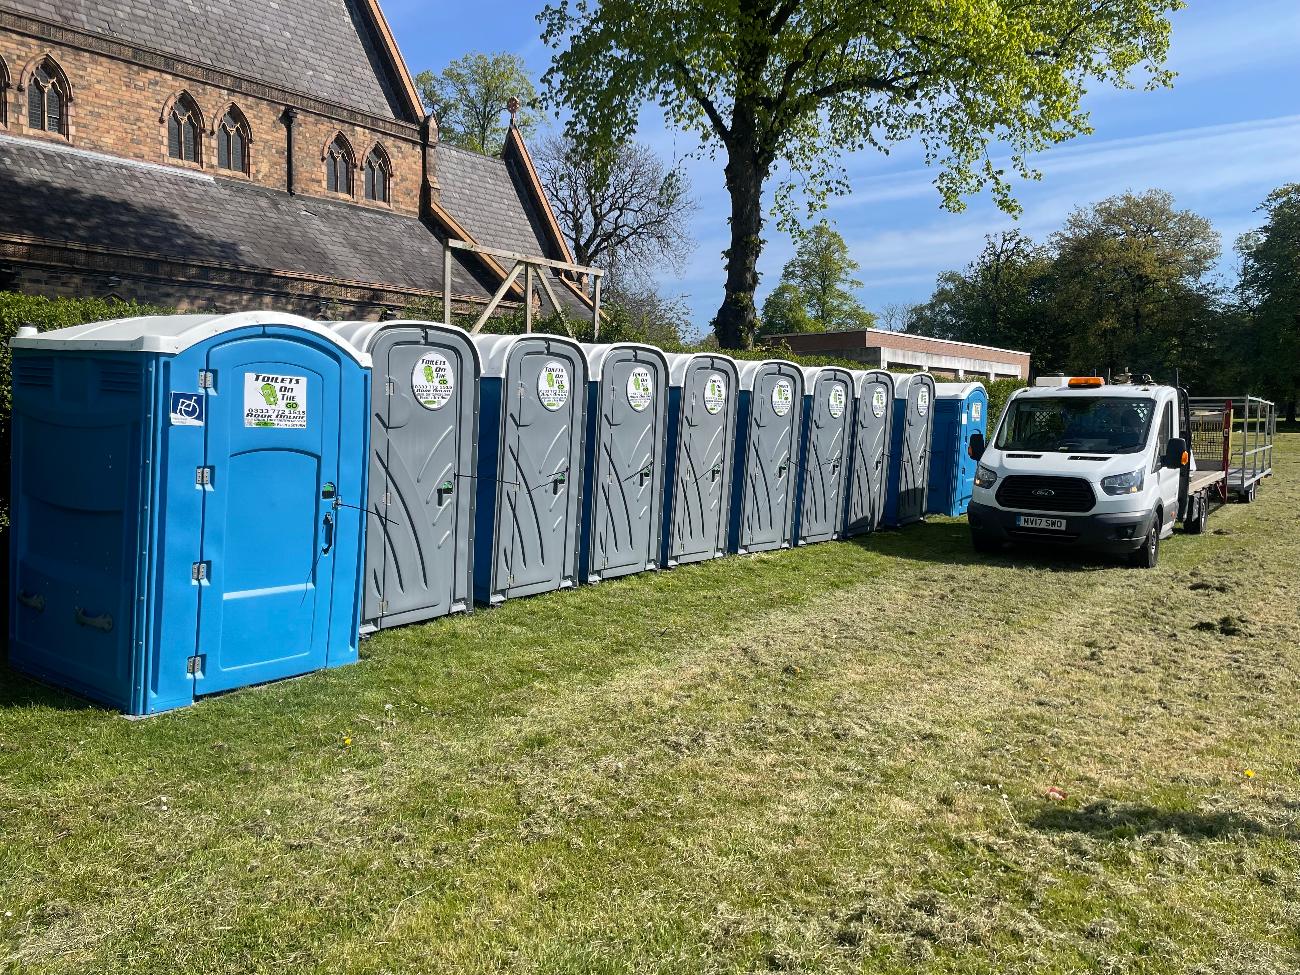 Gallery | Portable Toilet Loo Hire Rental Company in North West uk and Manchester gallery image 31